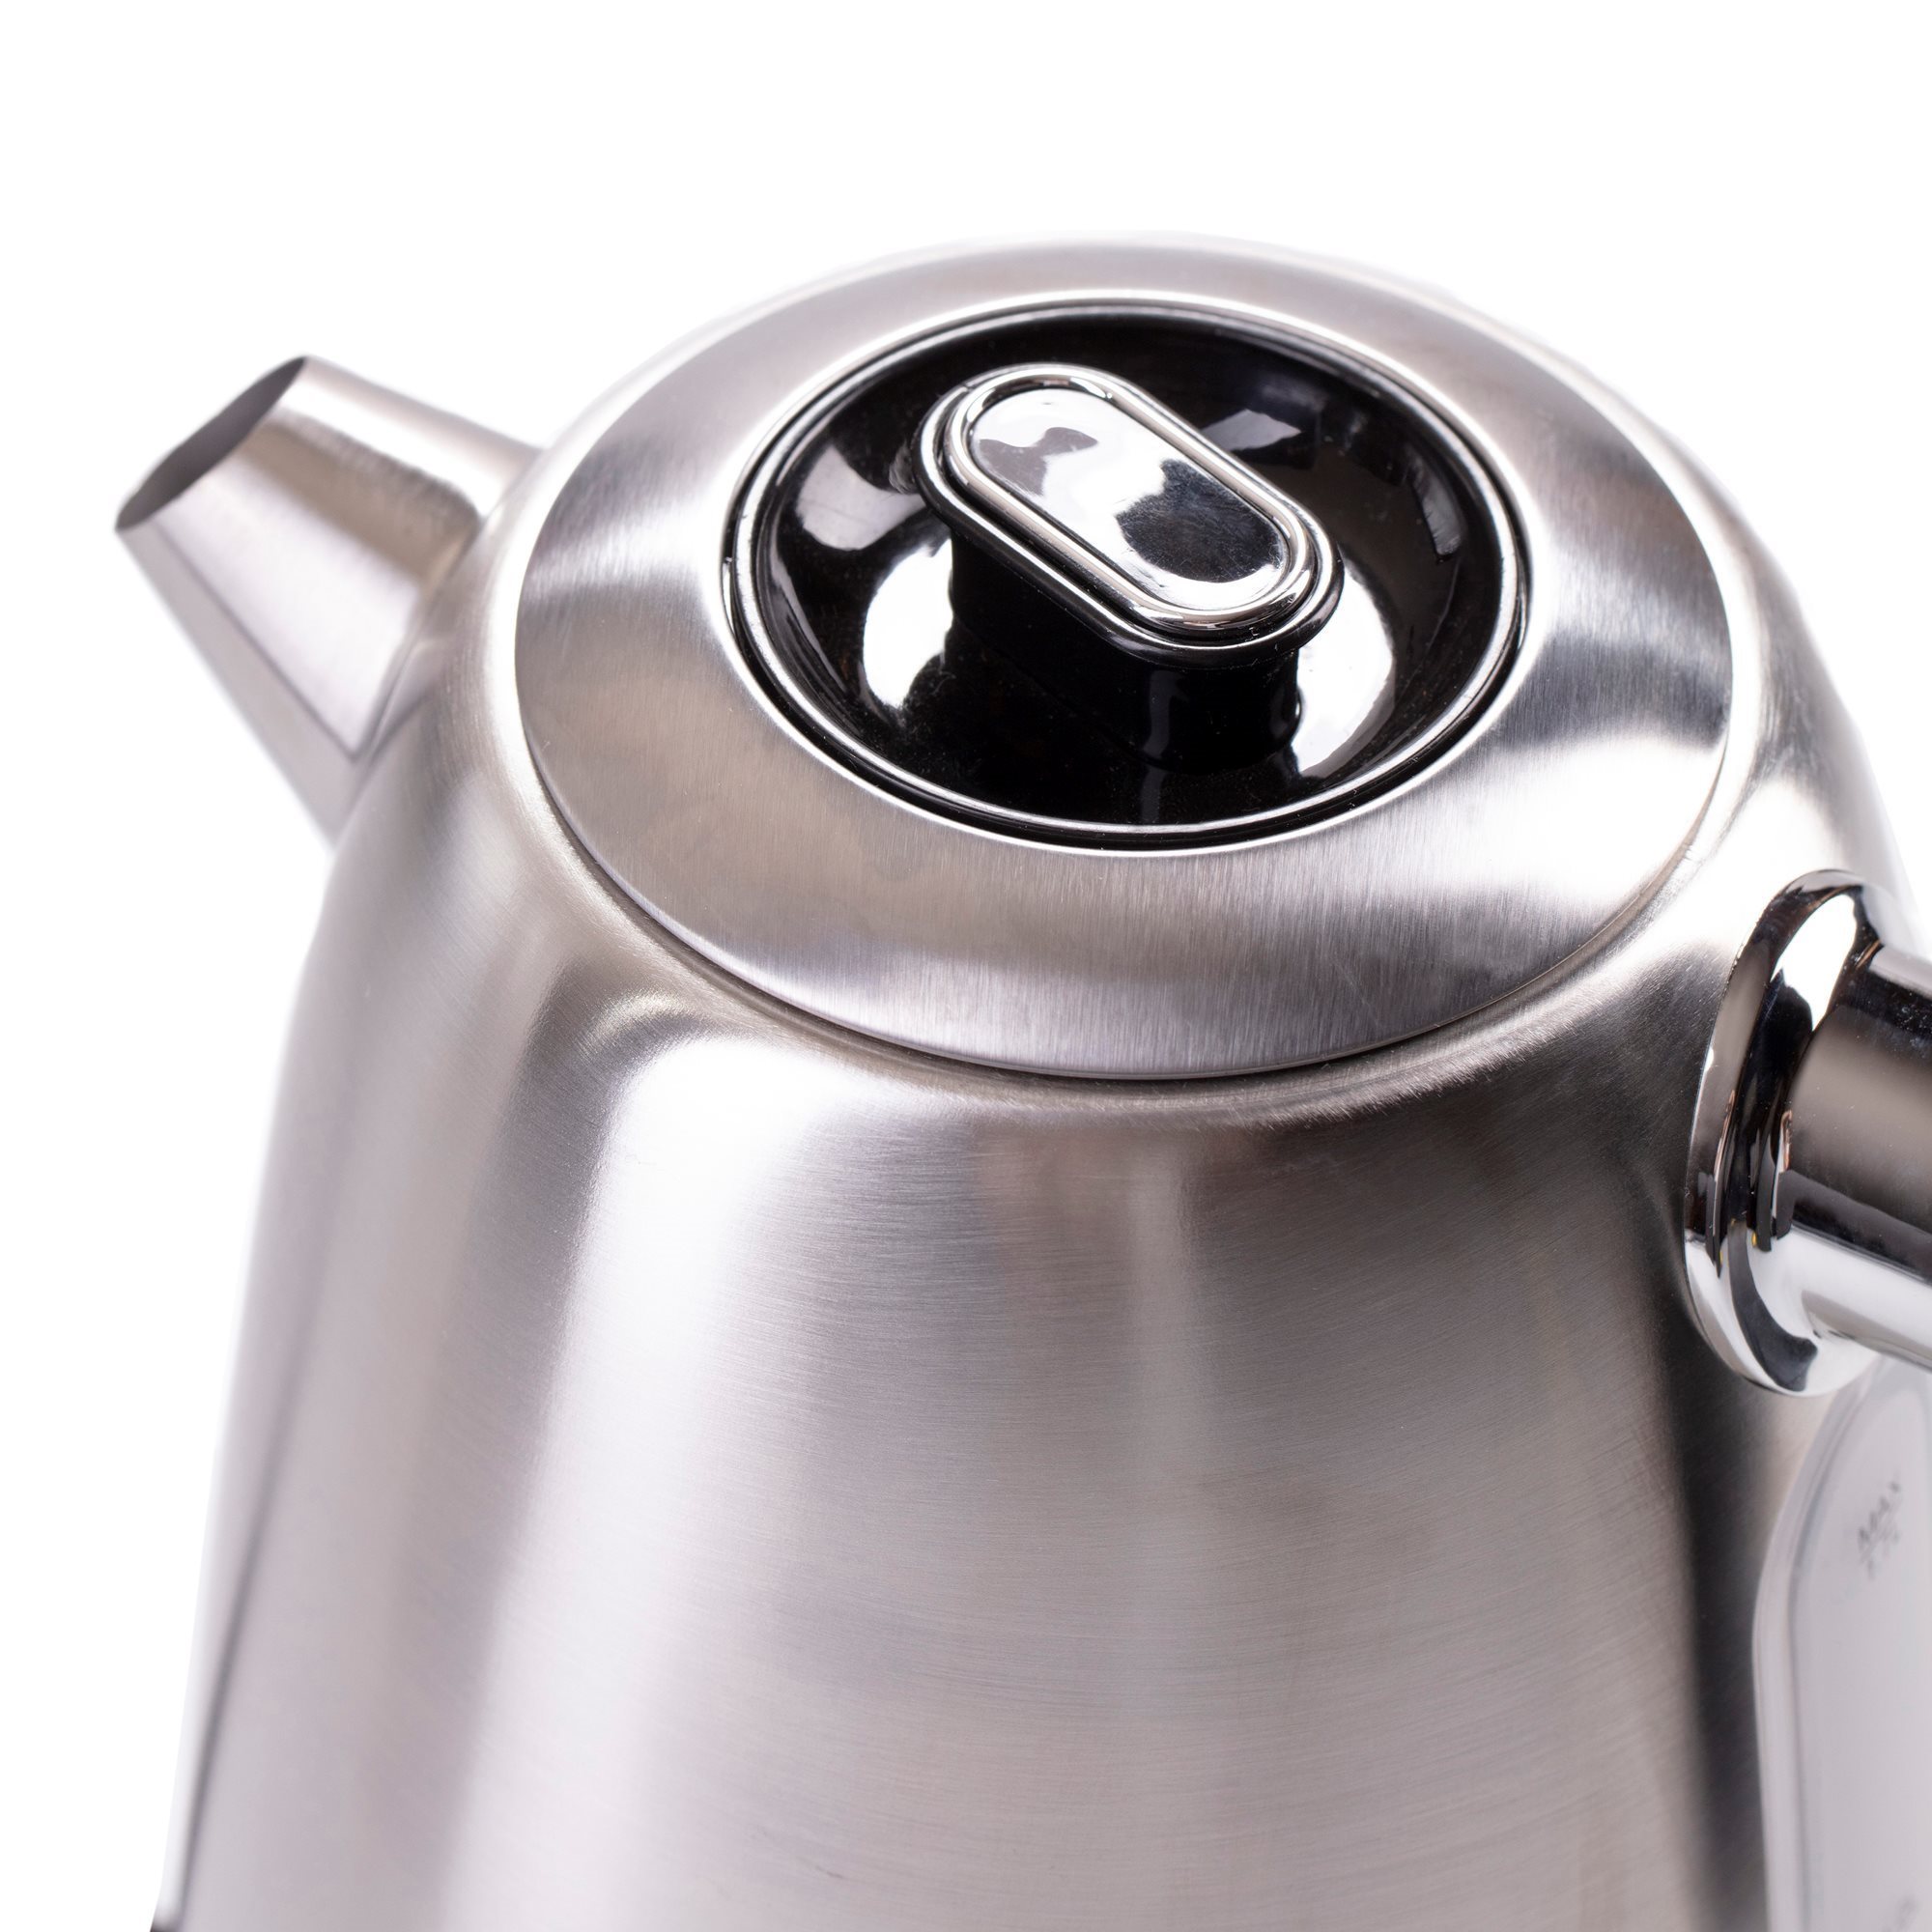 Tea Kettle for top, Stainless Steel Teapot Top Induction Kettles for  Boiling Hot Water, Large Capacity, Insulated Handle, Mirror Finish - 1.0L